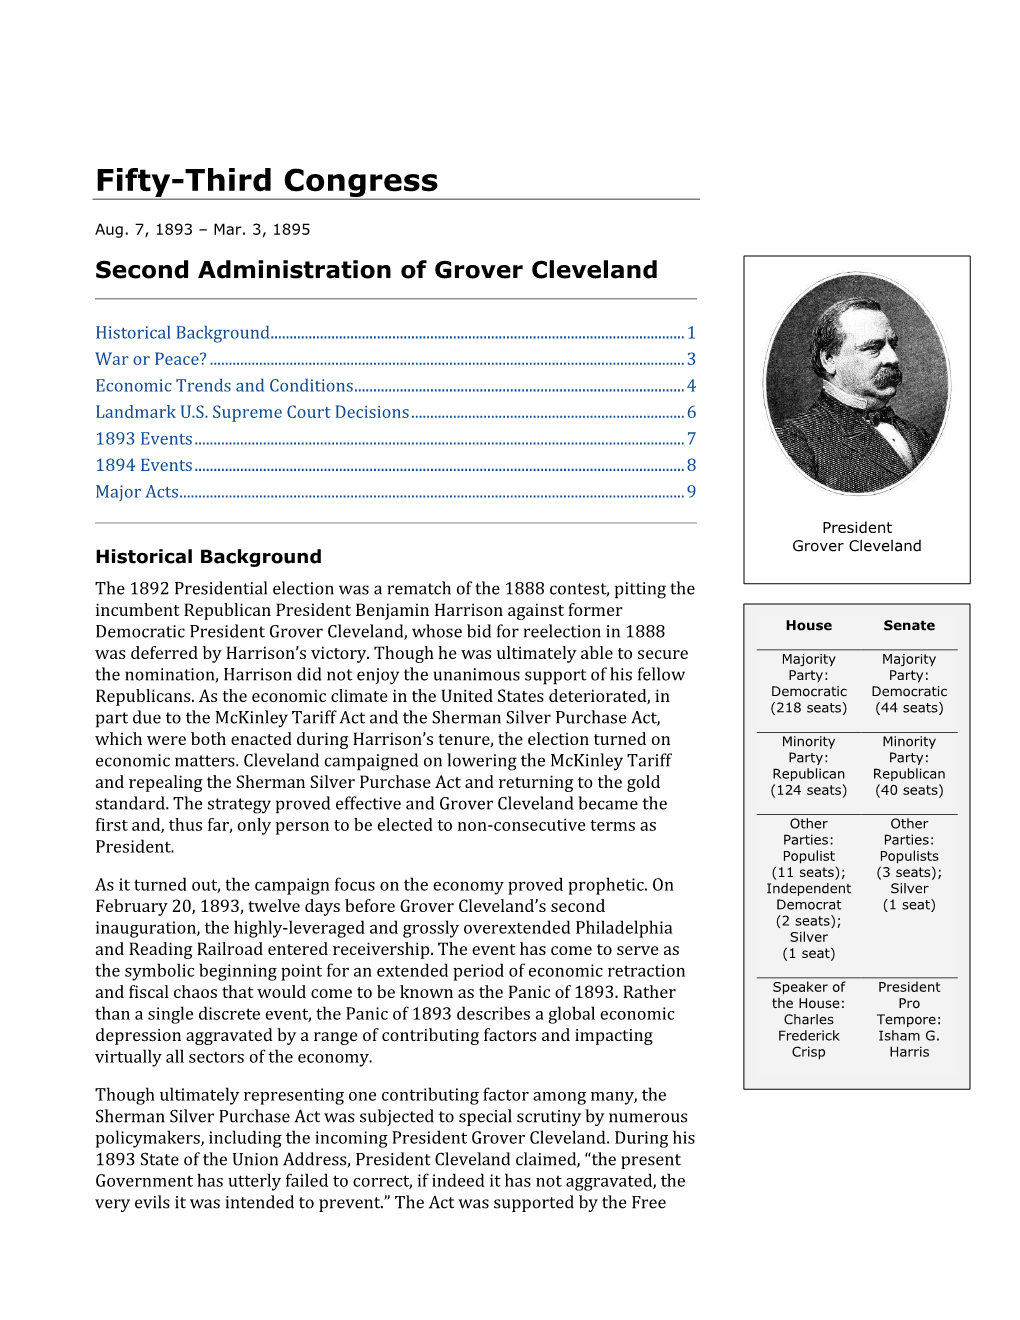 53Rd Congress Transpired During a Time of Relative Peace for the United States